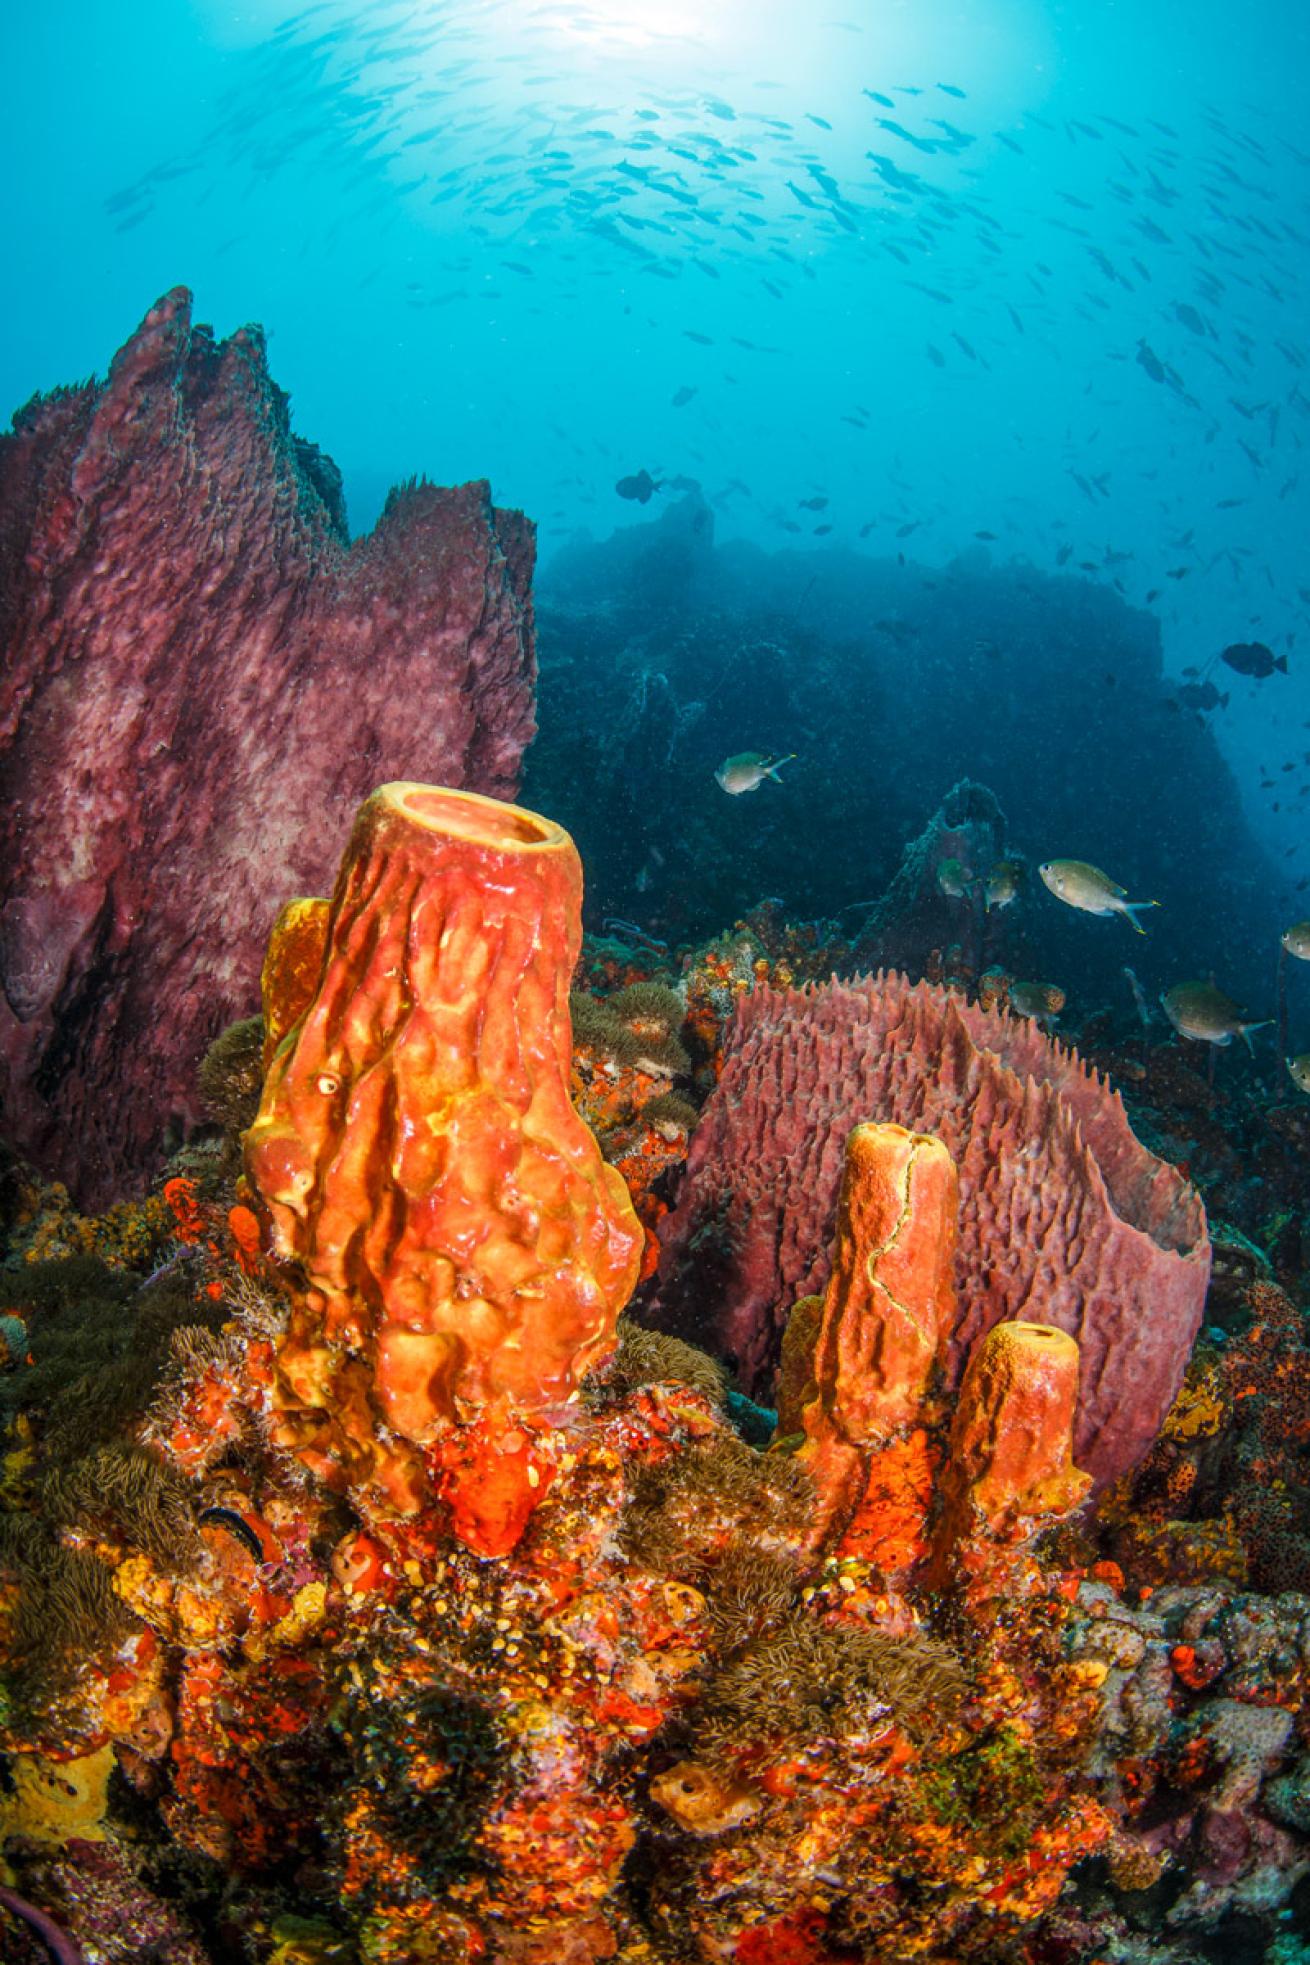 Reefs in Speyside boast huge sponges twisted into odd shapes from the constant currents